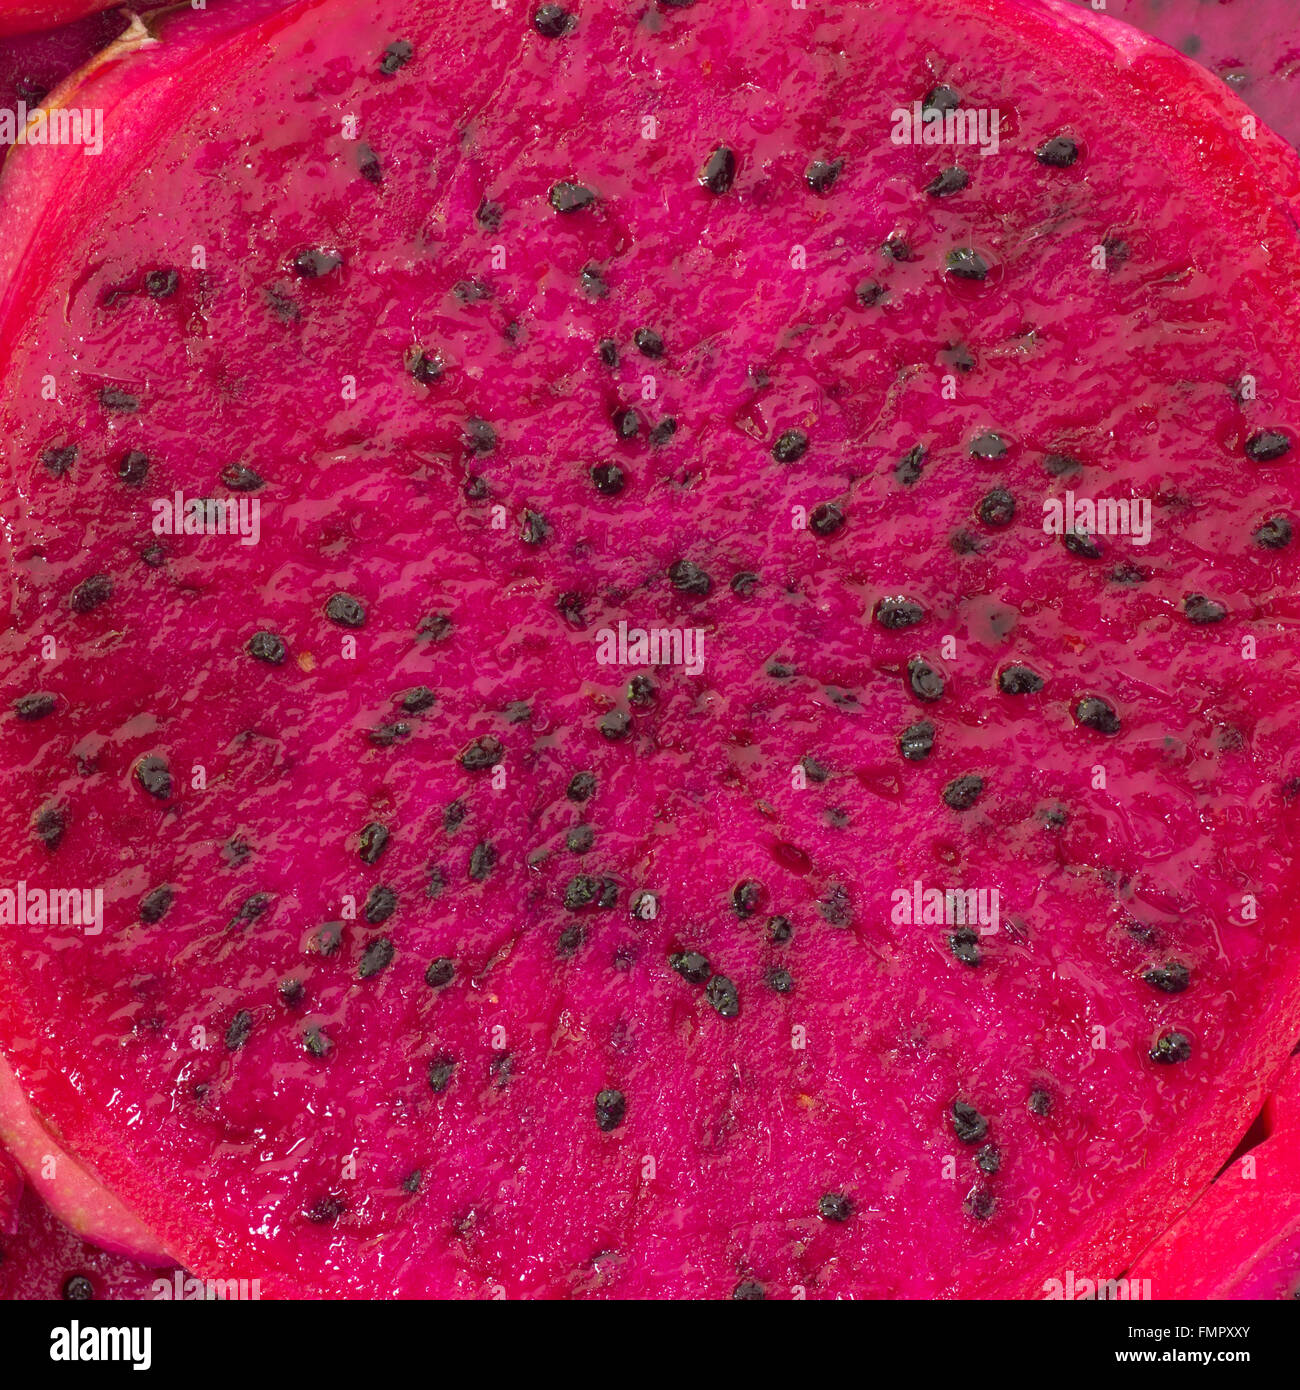 sliced red dragon fruit as background Stock Photo